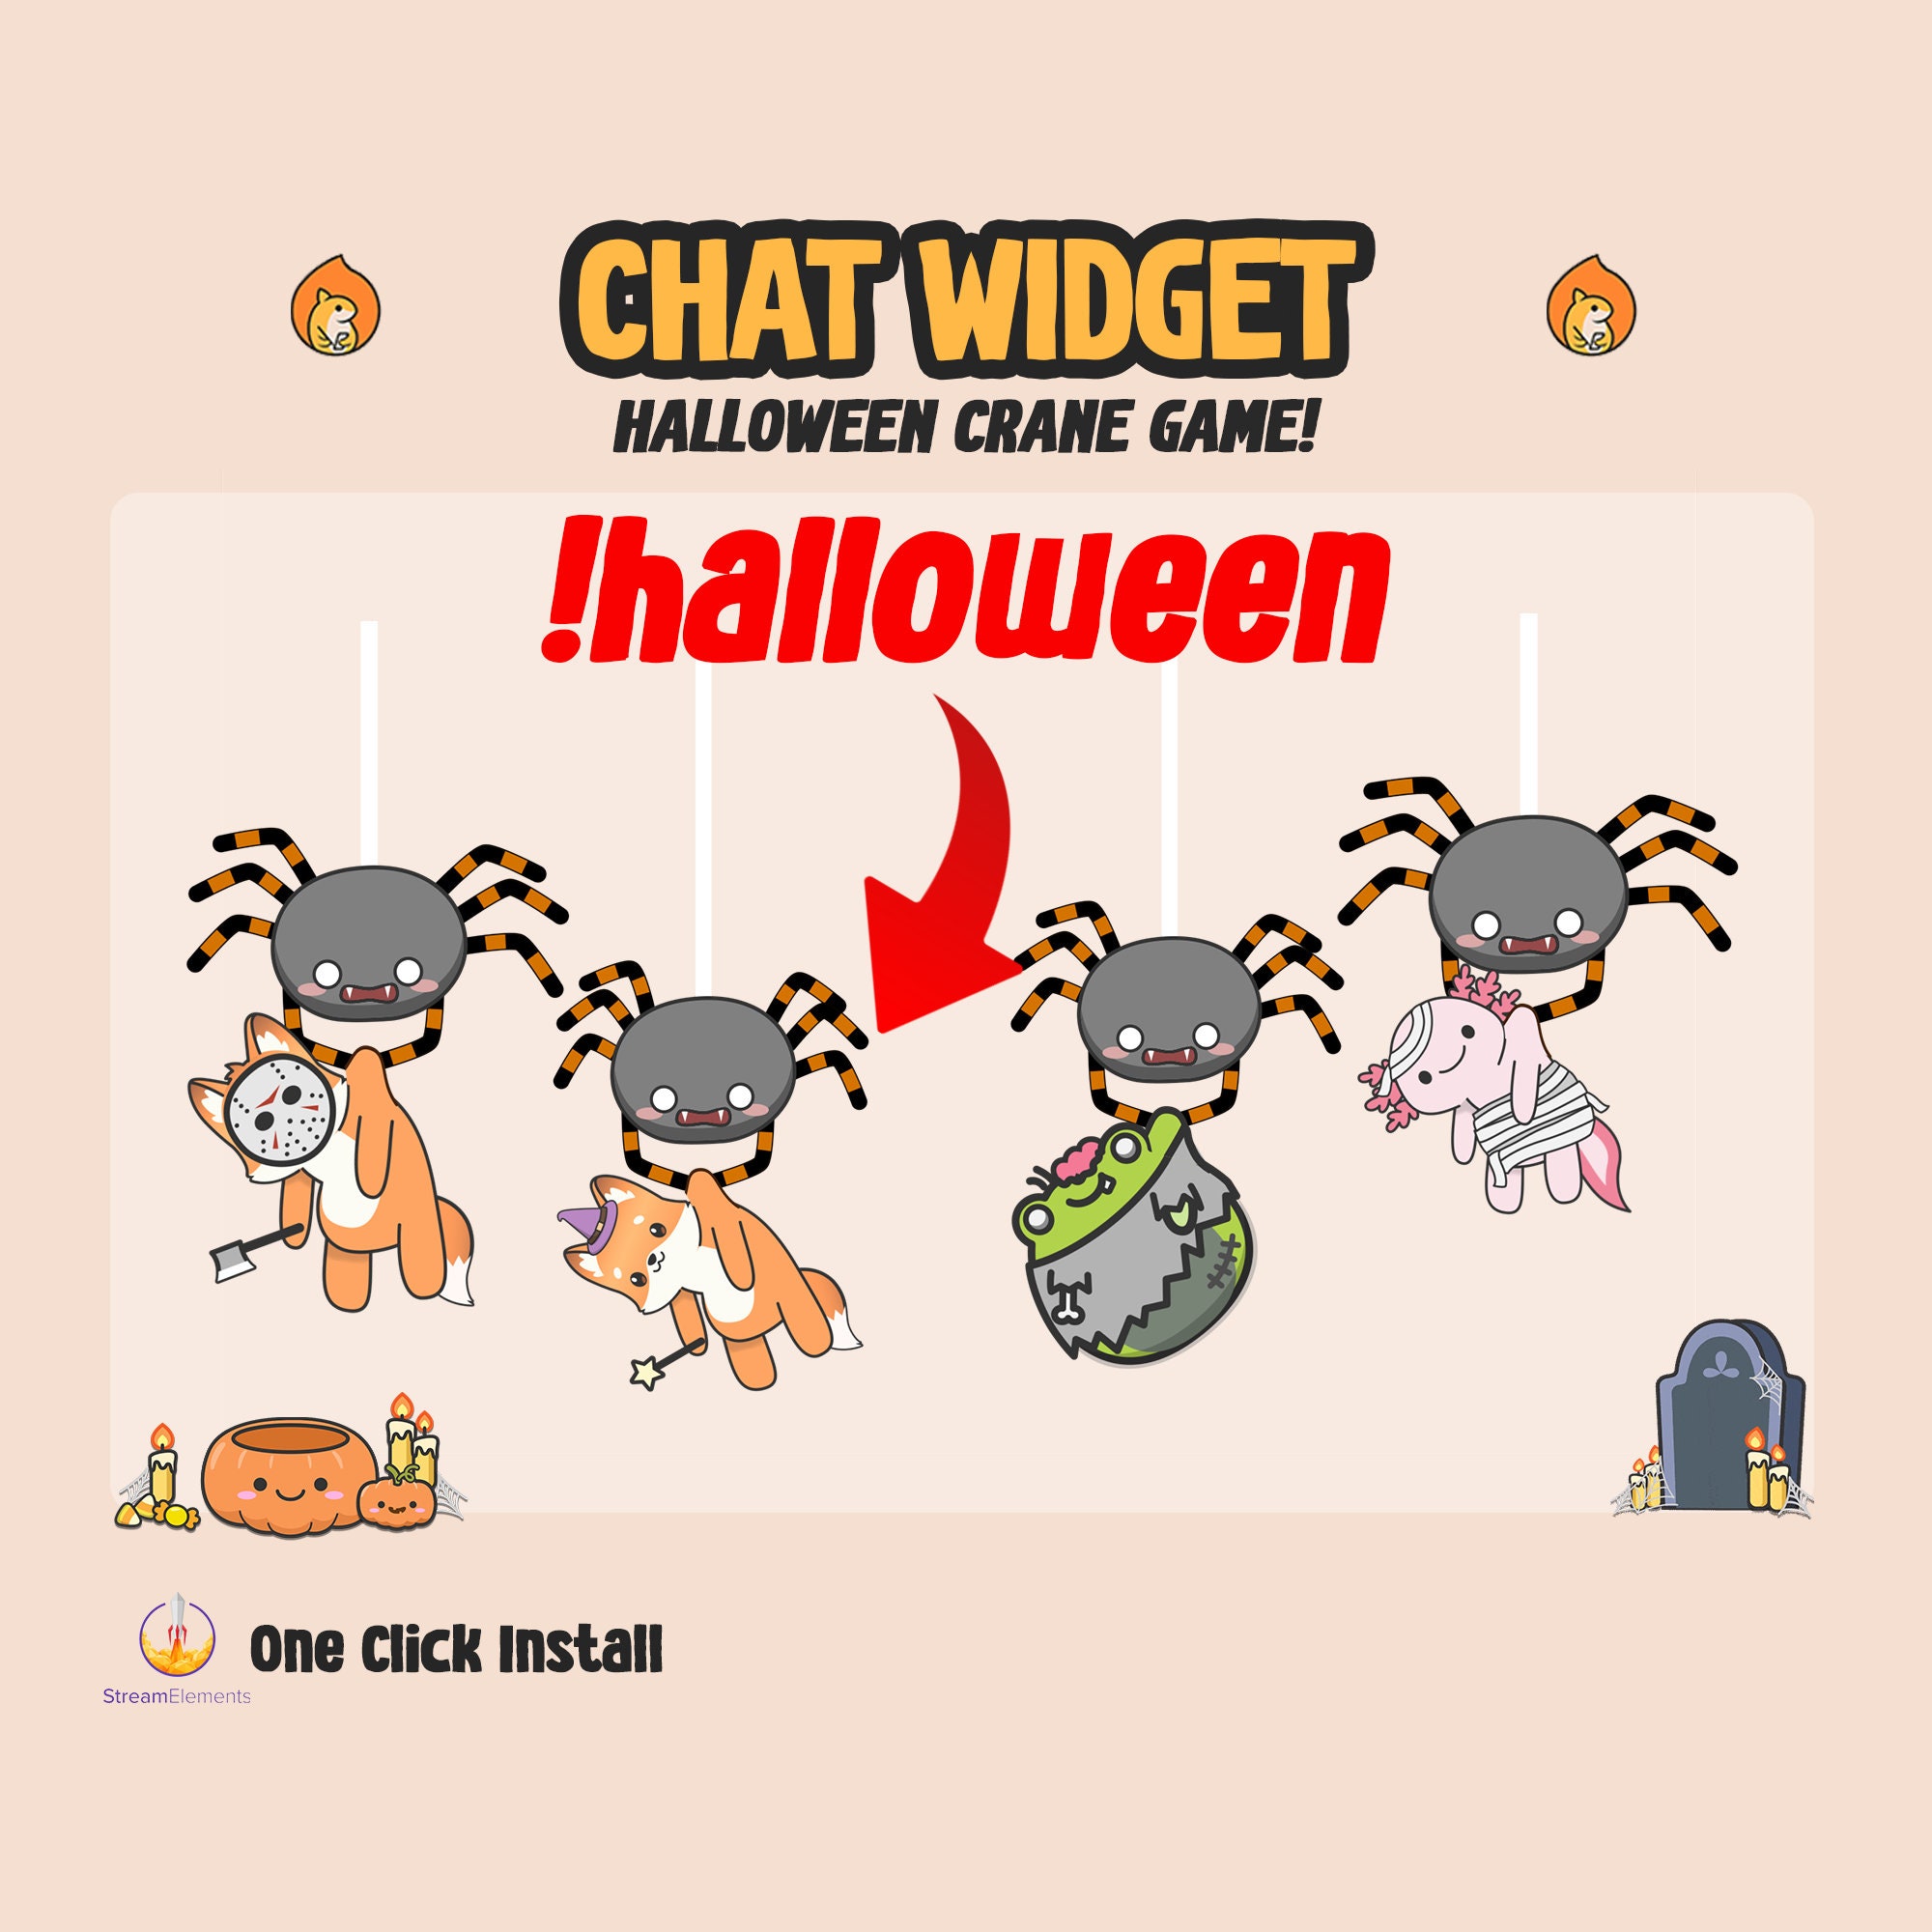 Adopt Me Halloween Update 2023 - Game Specifications